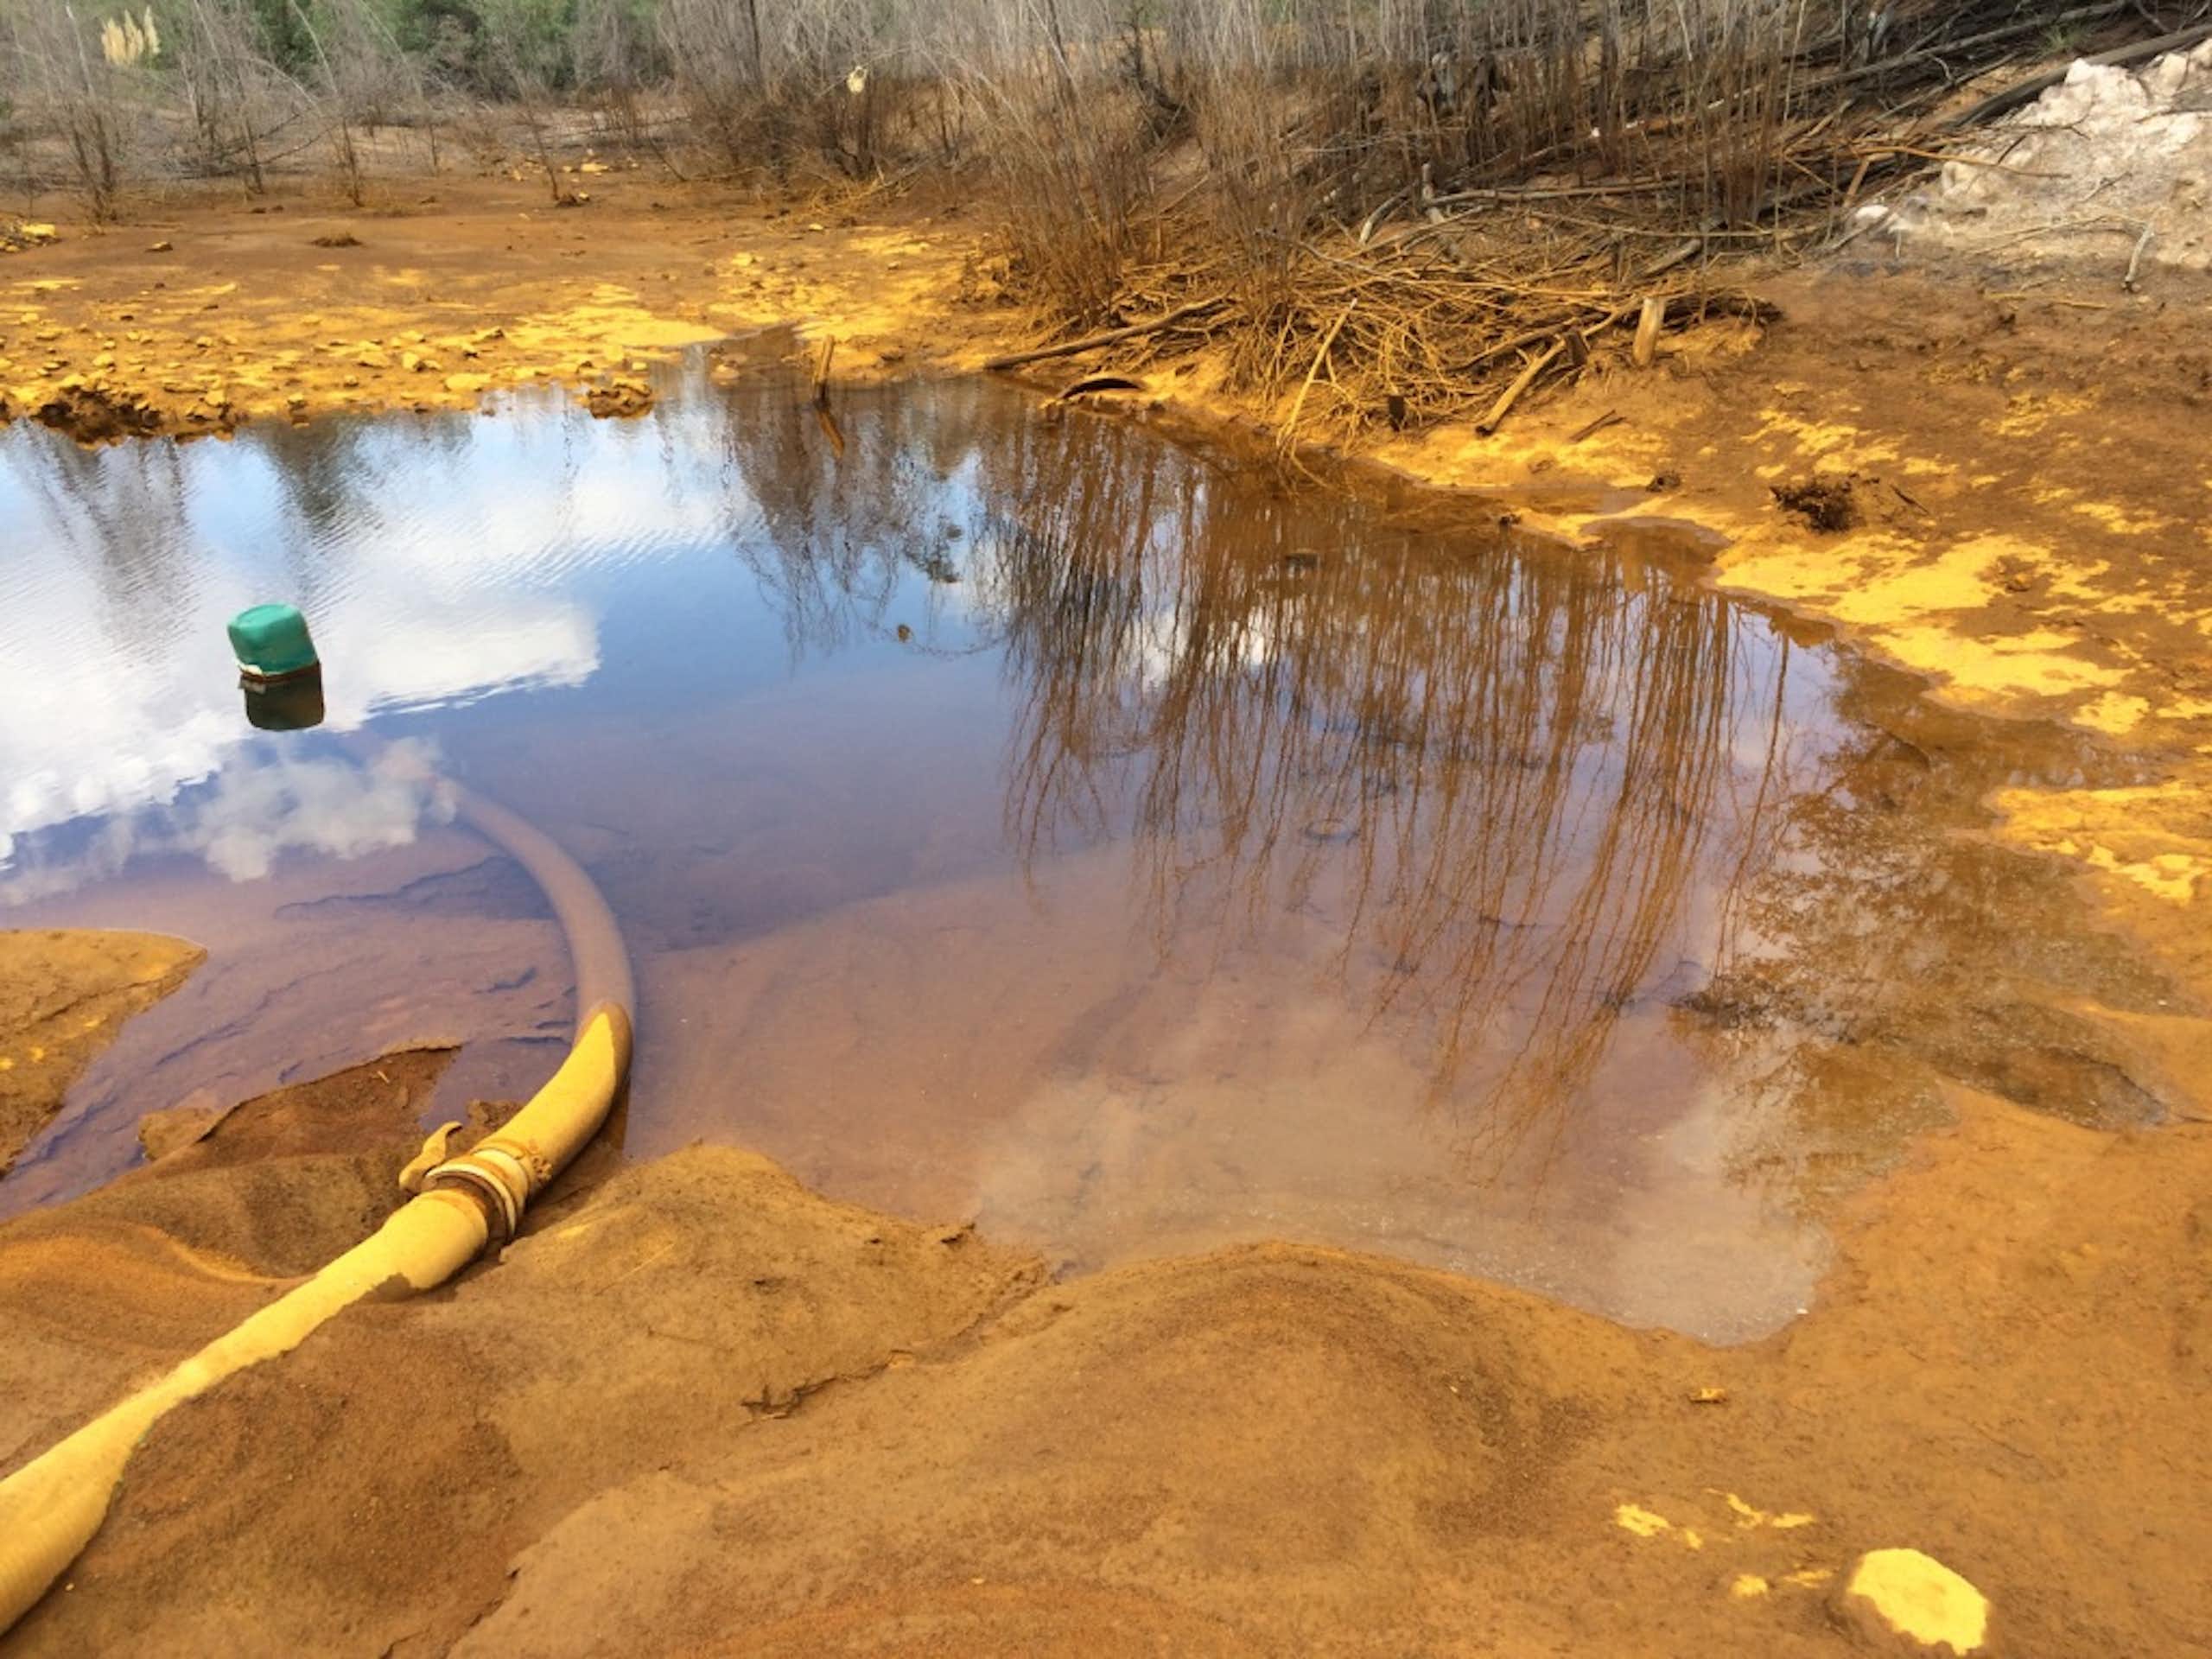 A yellow pipe feeds orange coloured water onto a large sandy area that looks very polluted